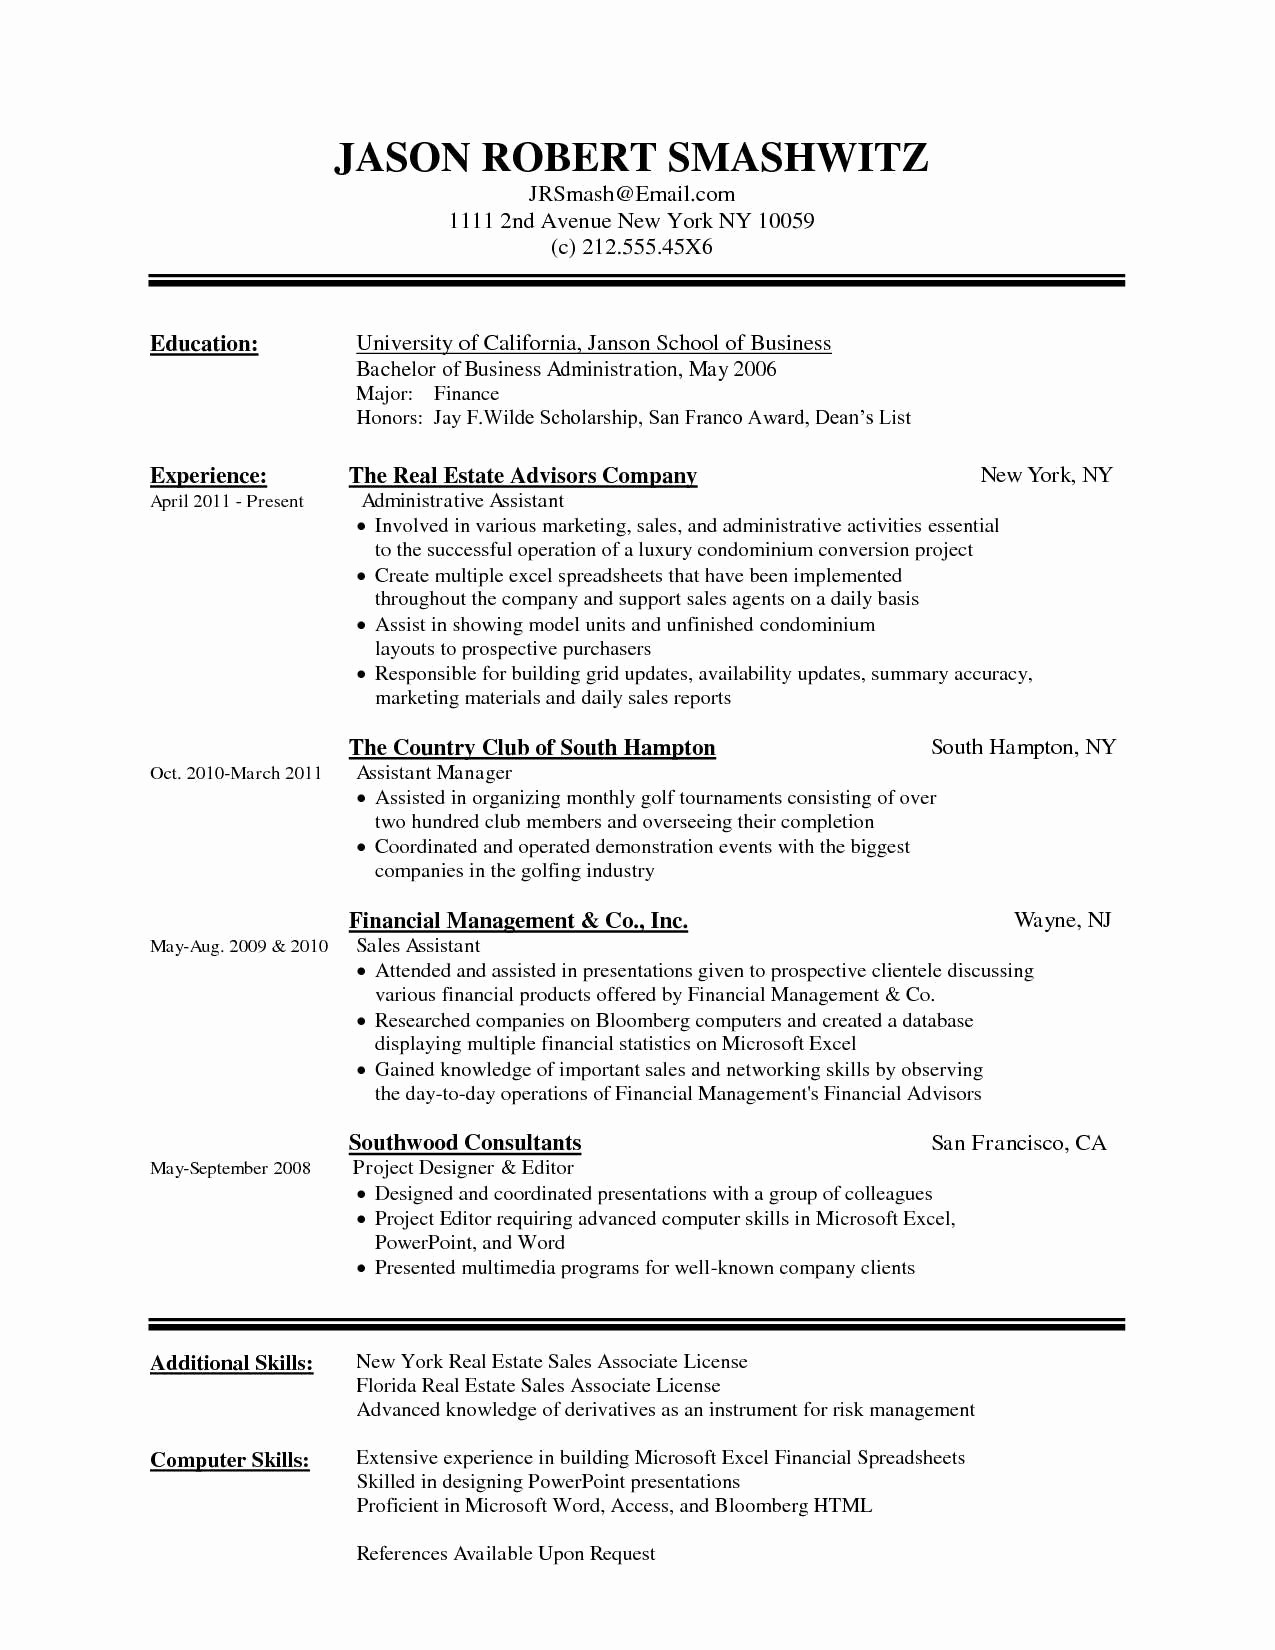 Resume Cover Letter Templates Word New Word Document Resume Template Sample Resume Cover Letter